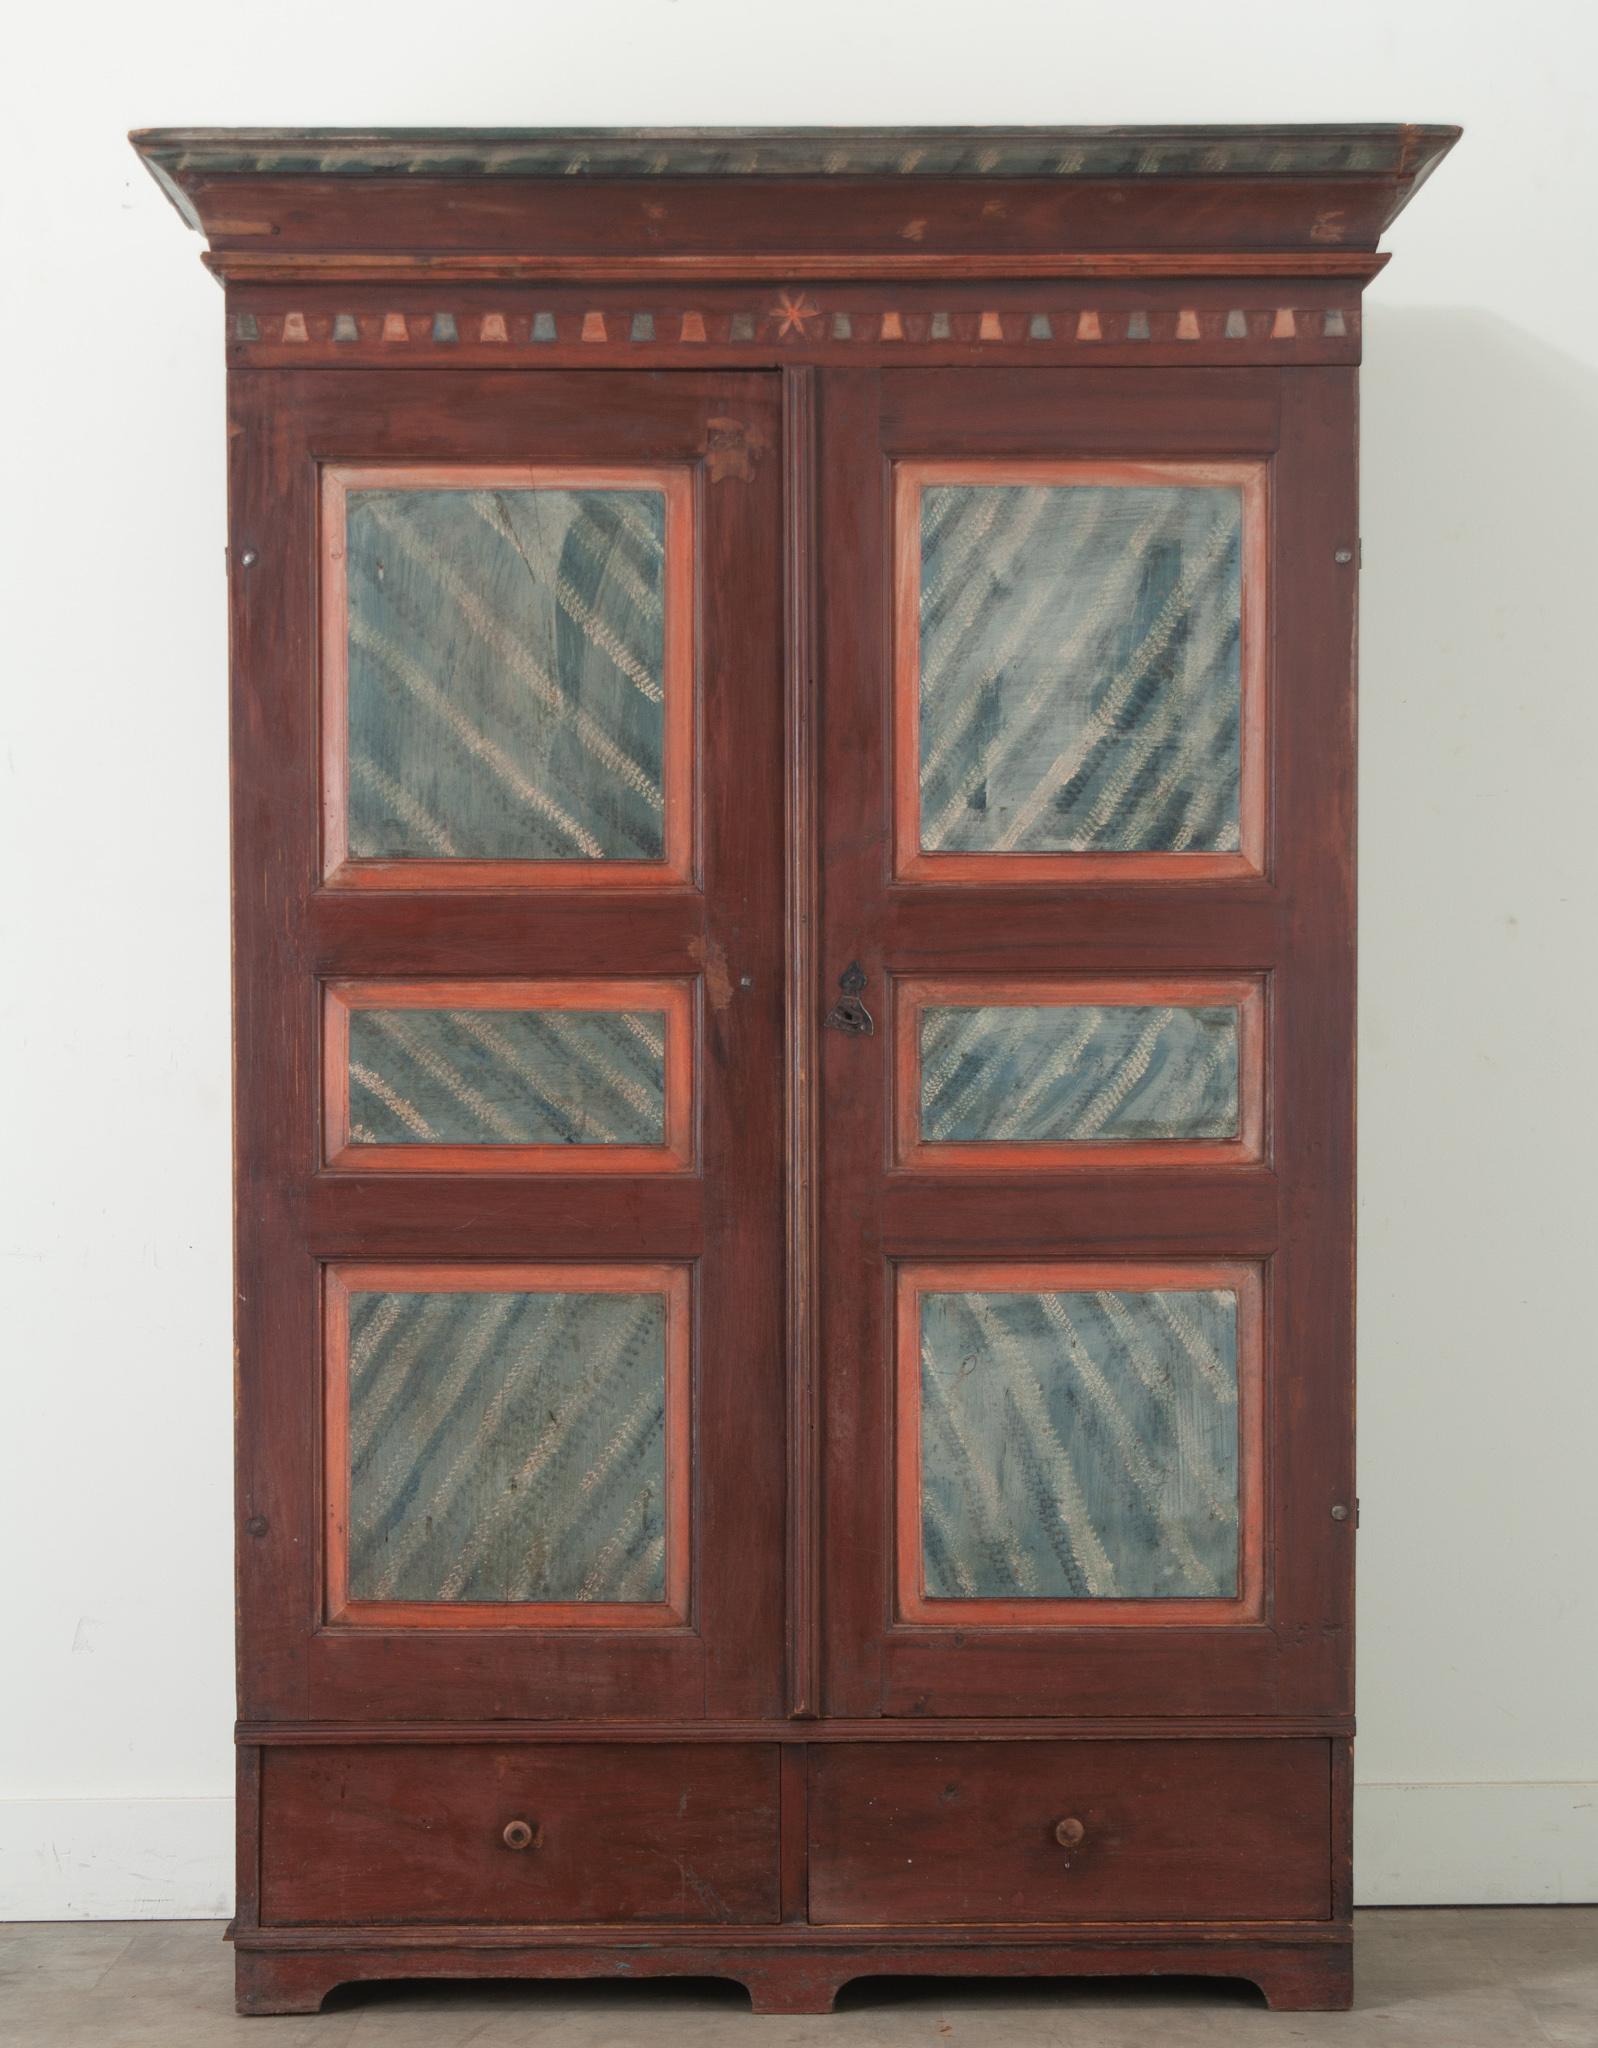 A Swedish Gustavian cabinet handmade in Halsingland during the 1700’s. This armoire is made of pine and has its original vibrant paint finish. The top features a sharply molded cornice atop a pair of paneled double doors over a pair of drawers. The